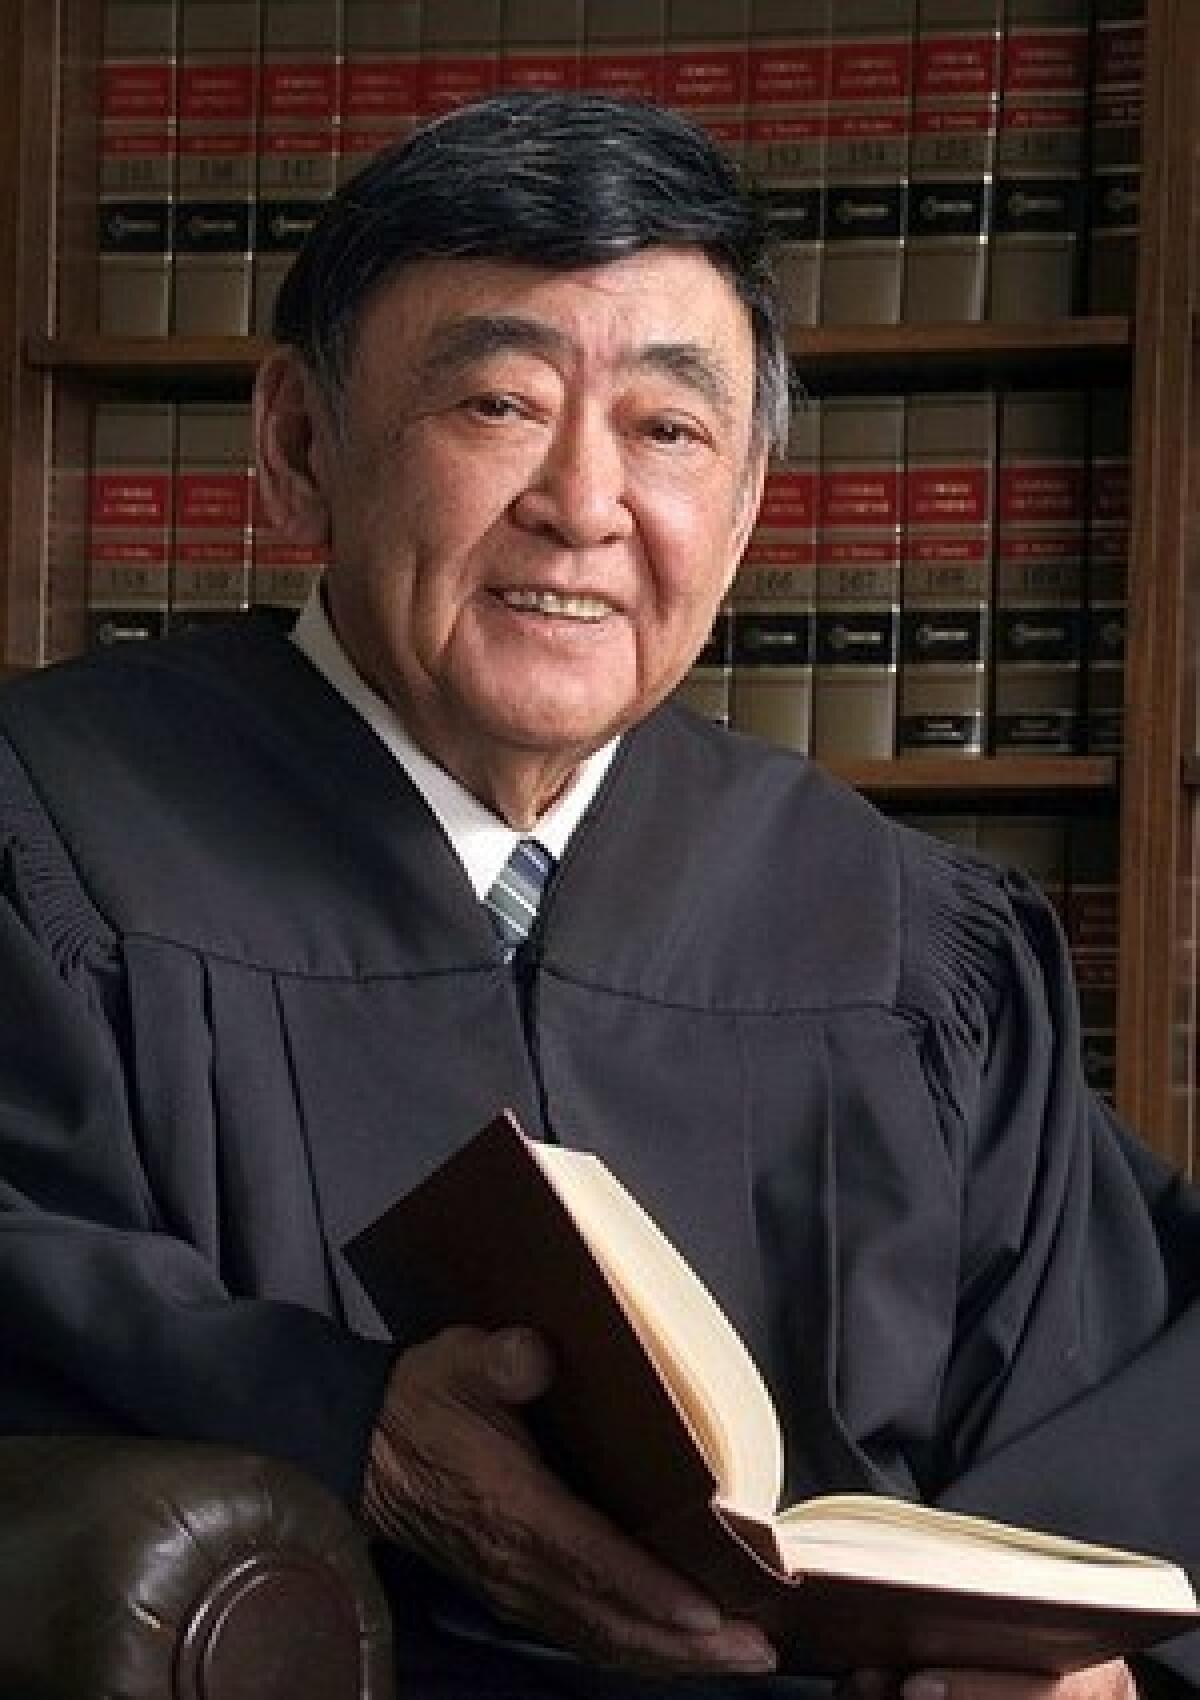 Robert M. Takasugi was interned in a WWII relocation camp. On the bench he was known for his compassion for victims of injustice and his calm demeanor.